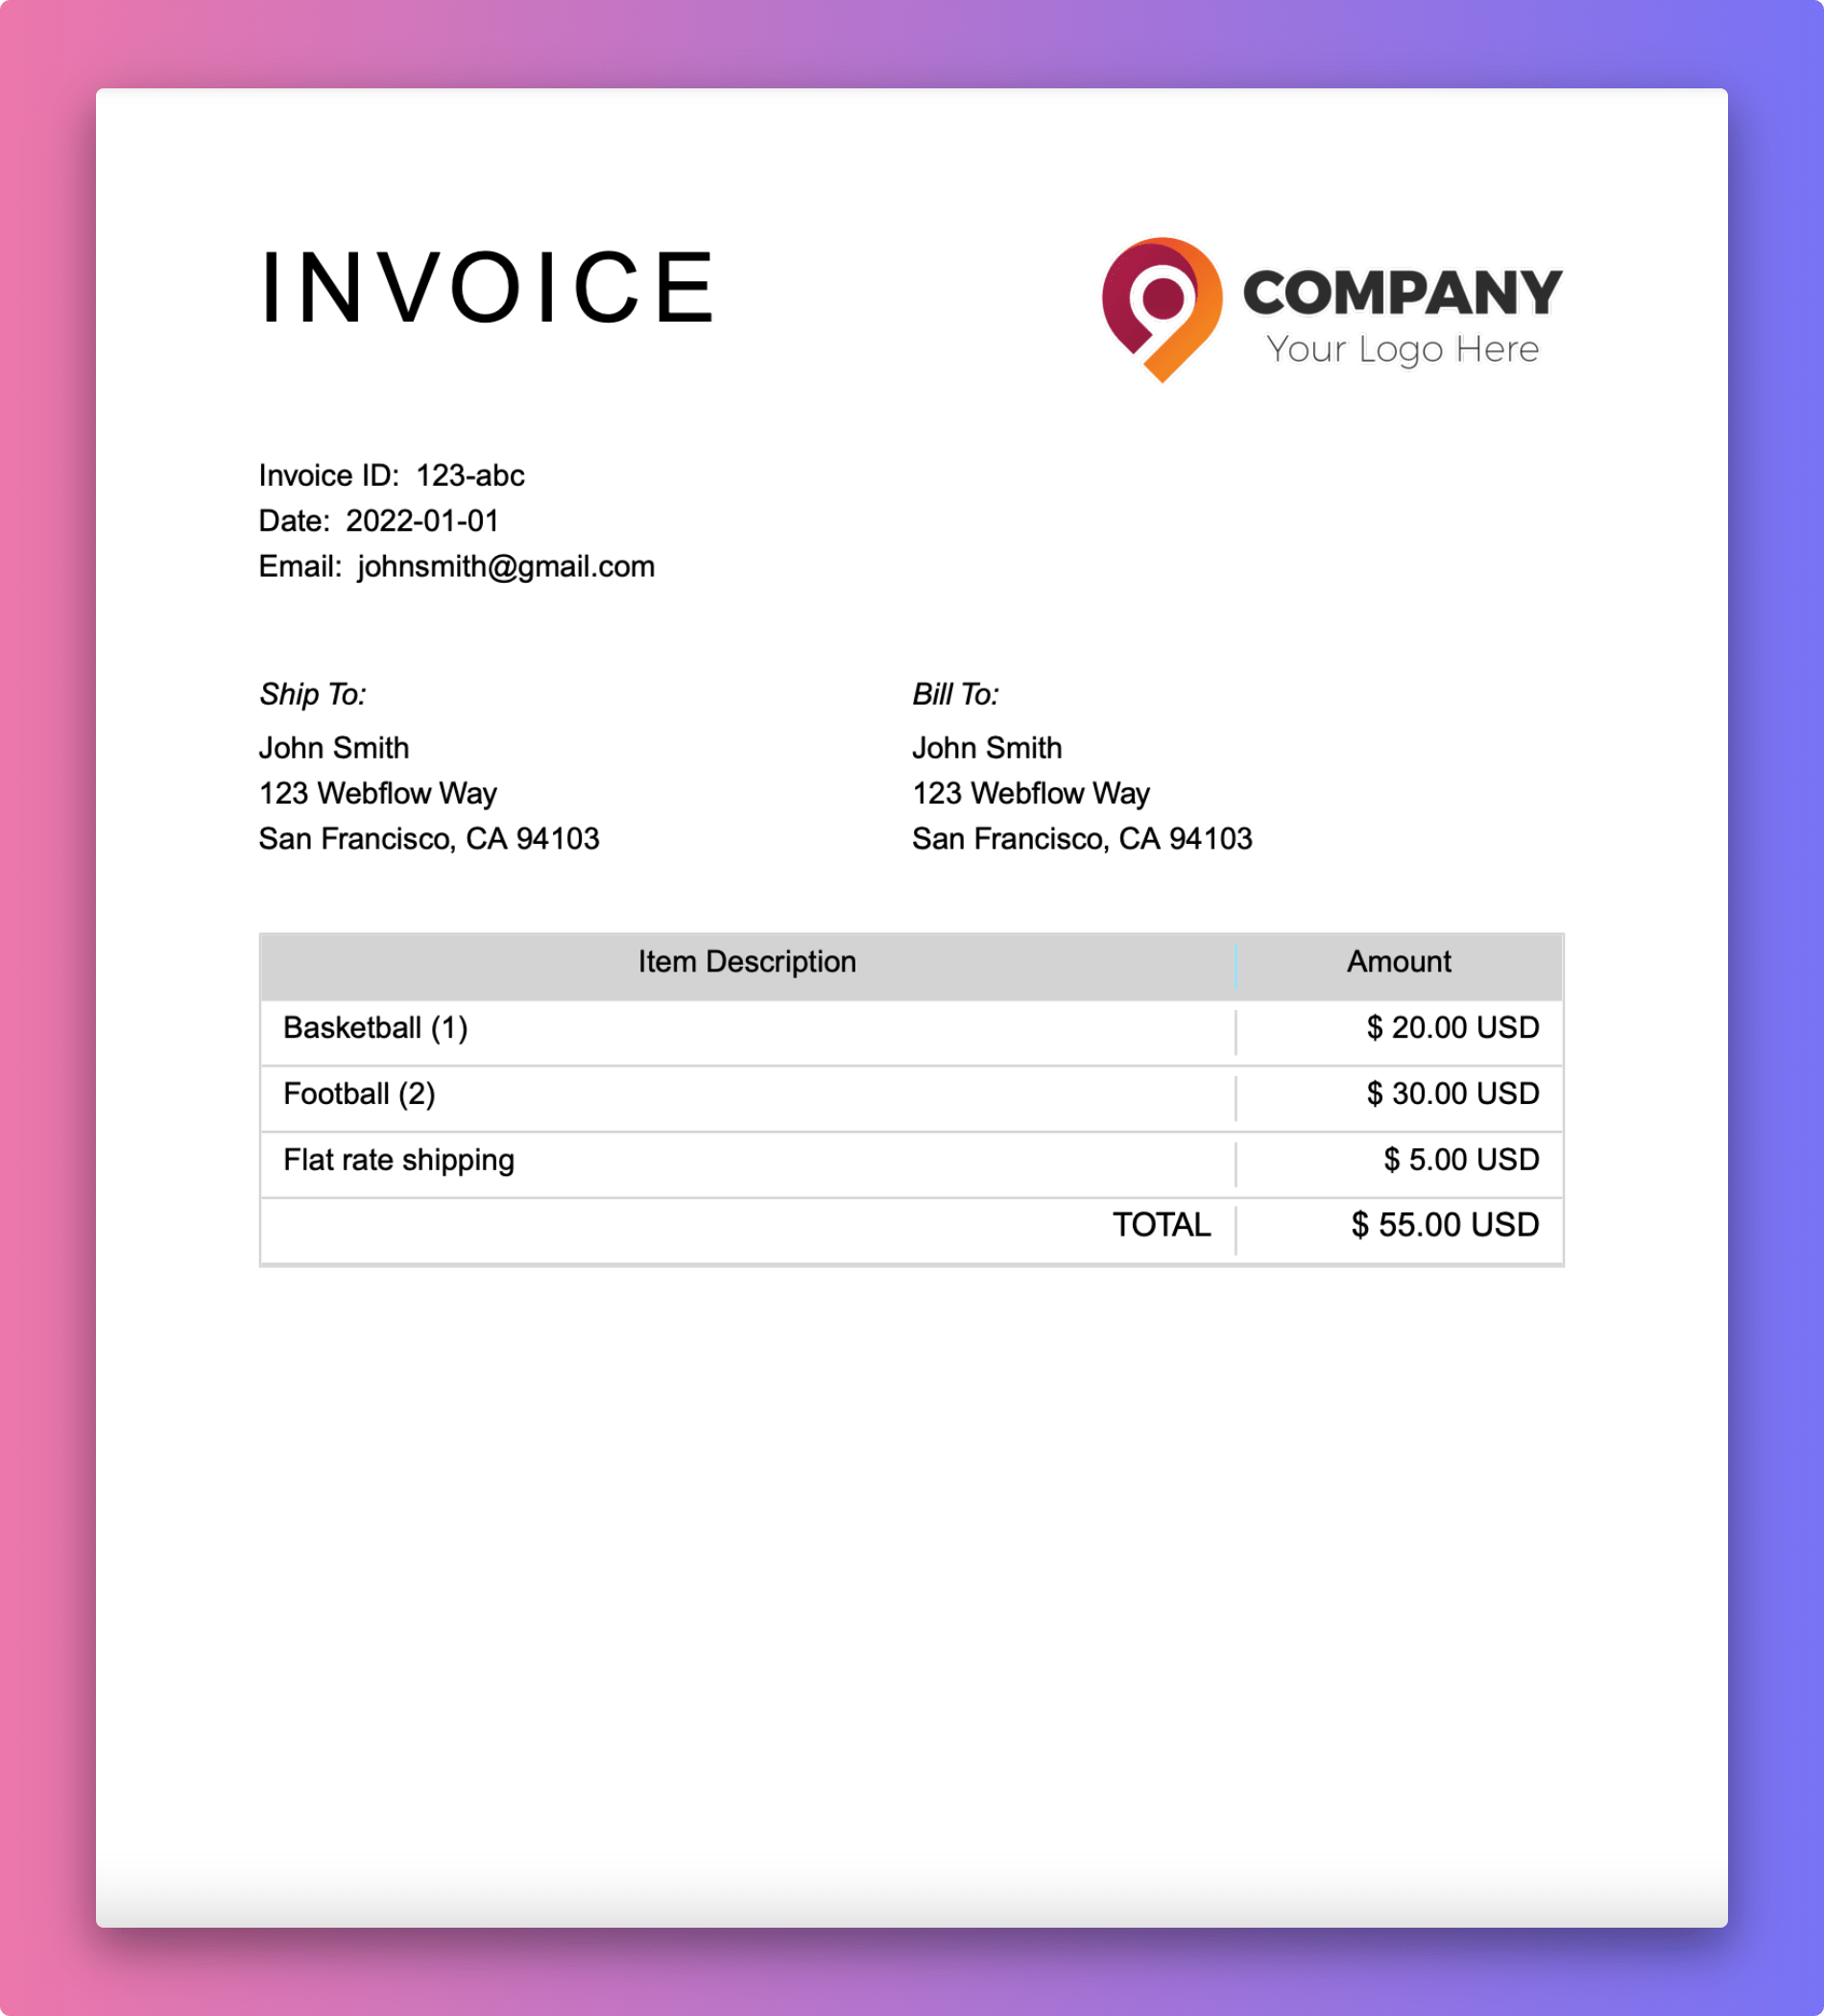 Print Order Invoices